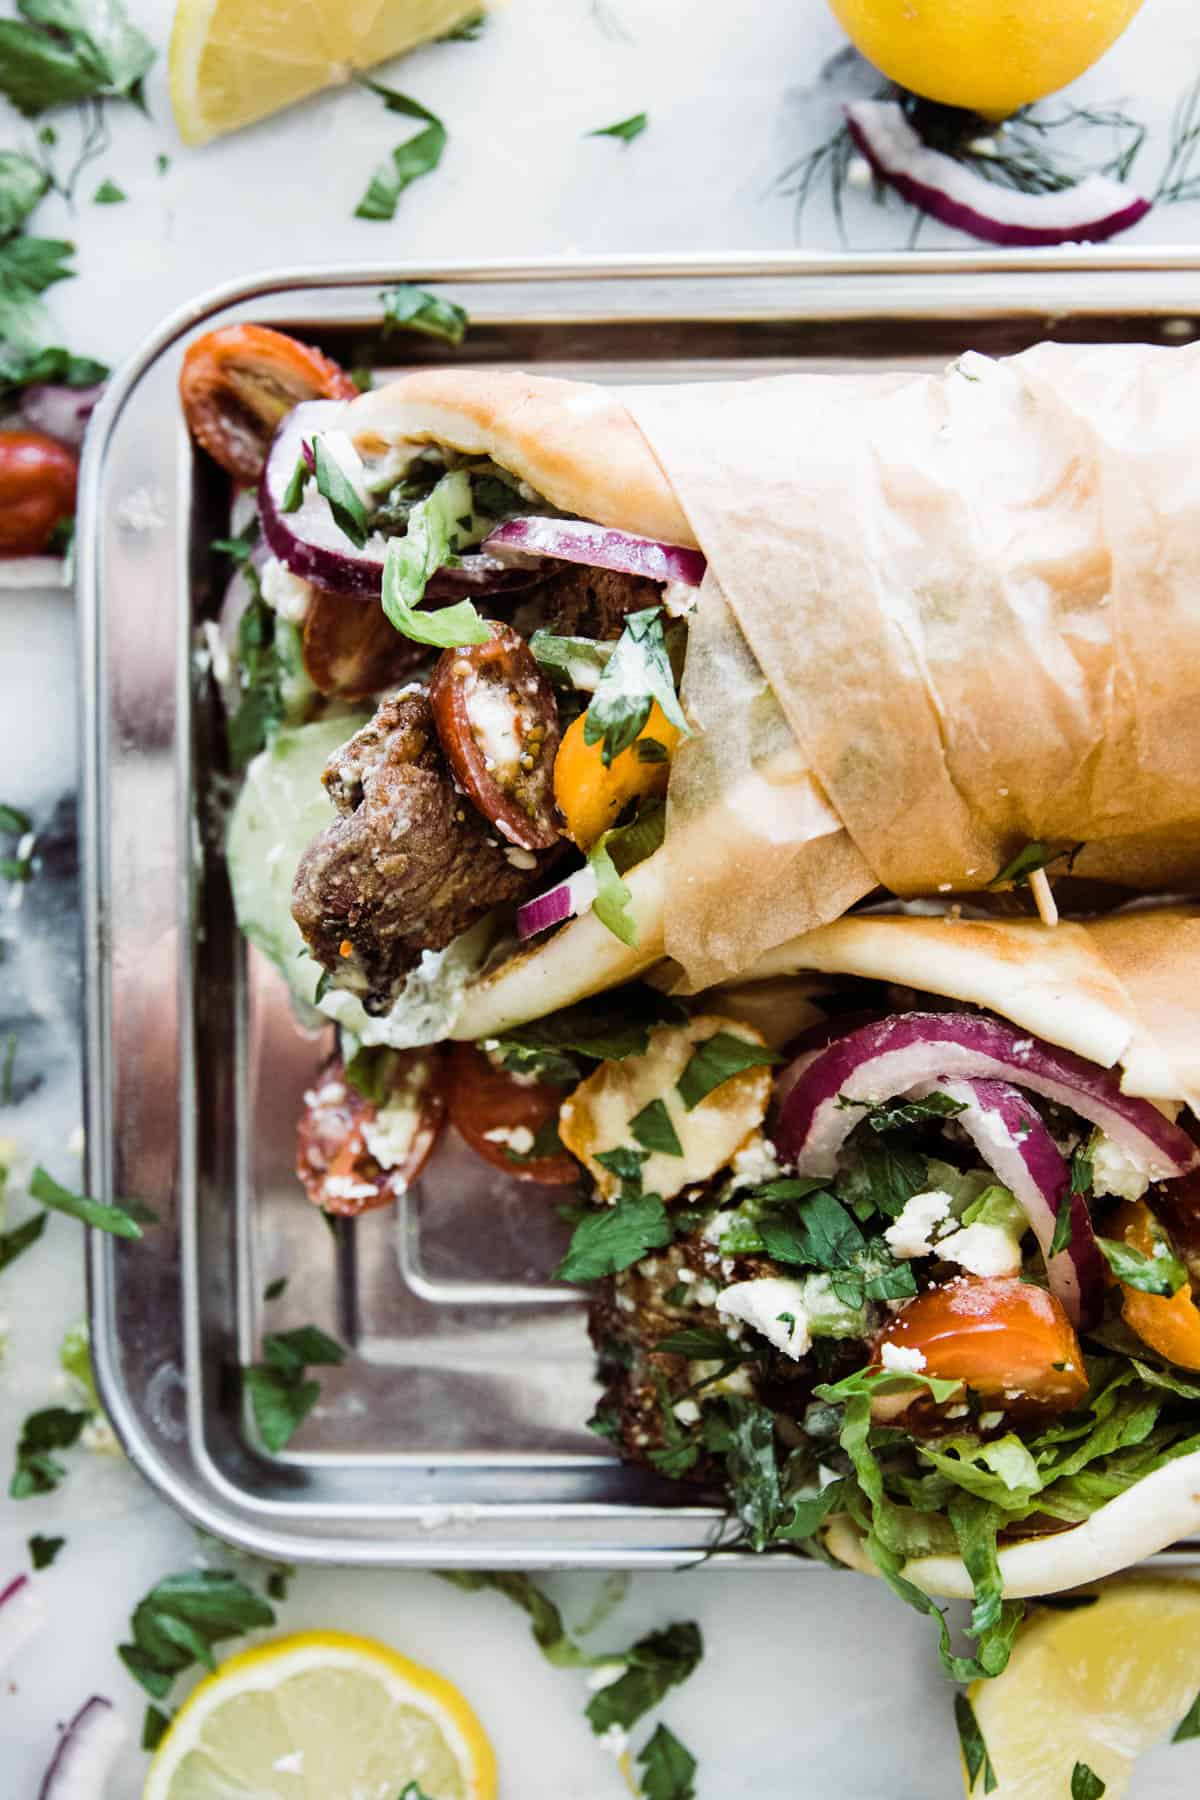 Two lamb gyros wrapped in brown paper served on a tray.